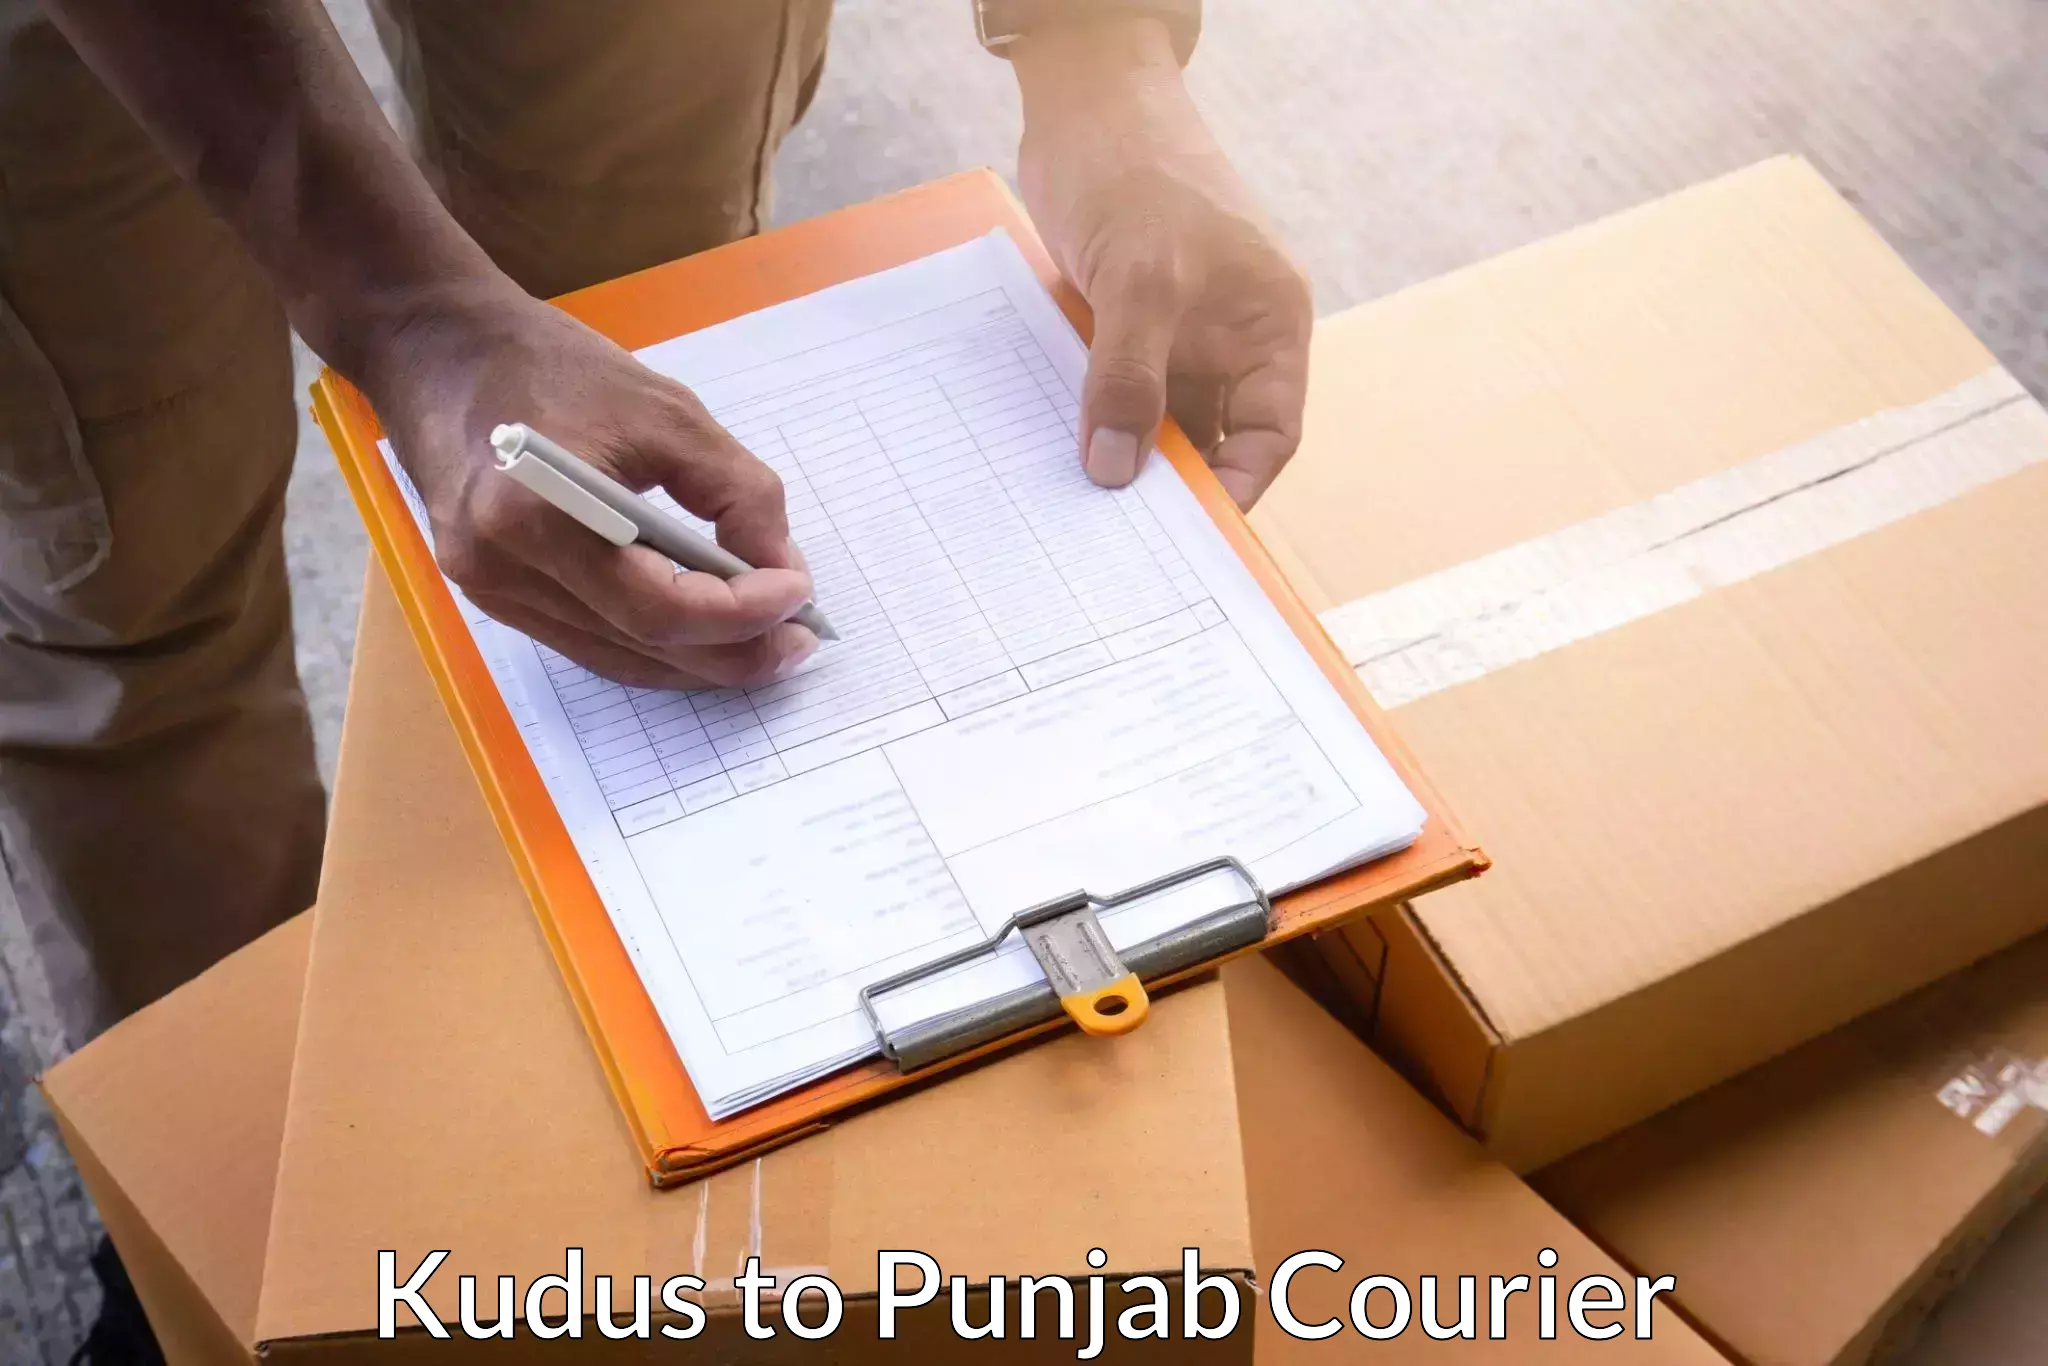 Nationwide delivery network Kudus to Punjab